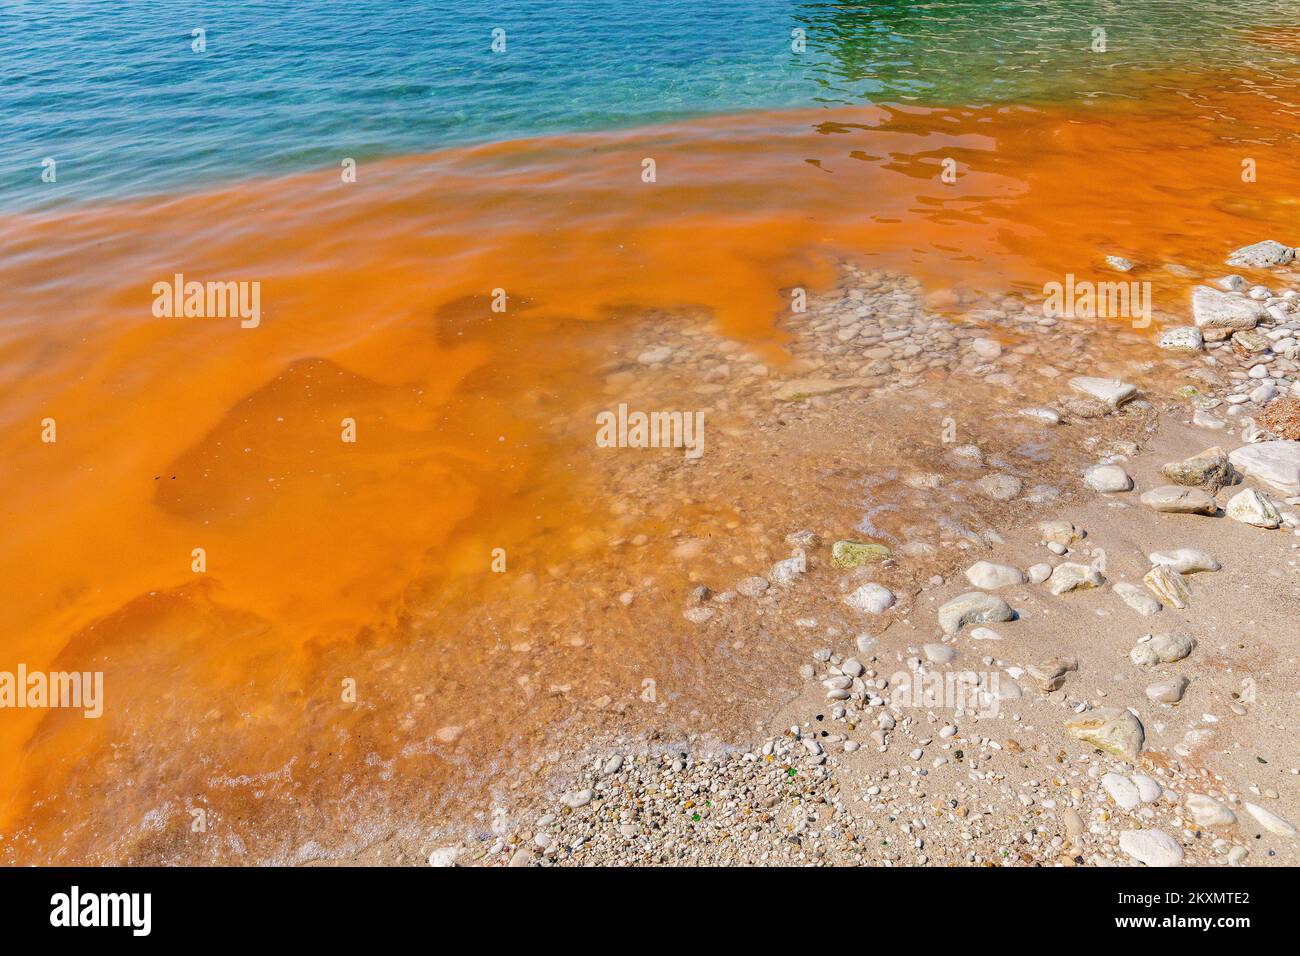 Photo taken on March 29 shows red tide, algae bloom in beach in Pula,  Croatia. Red tide is a phenomenon caused by algal blooms during which algae  become so numerous that they